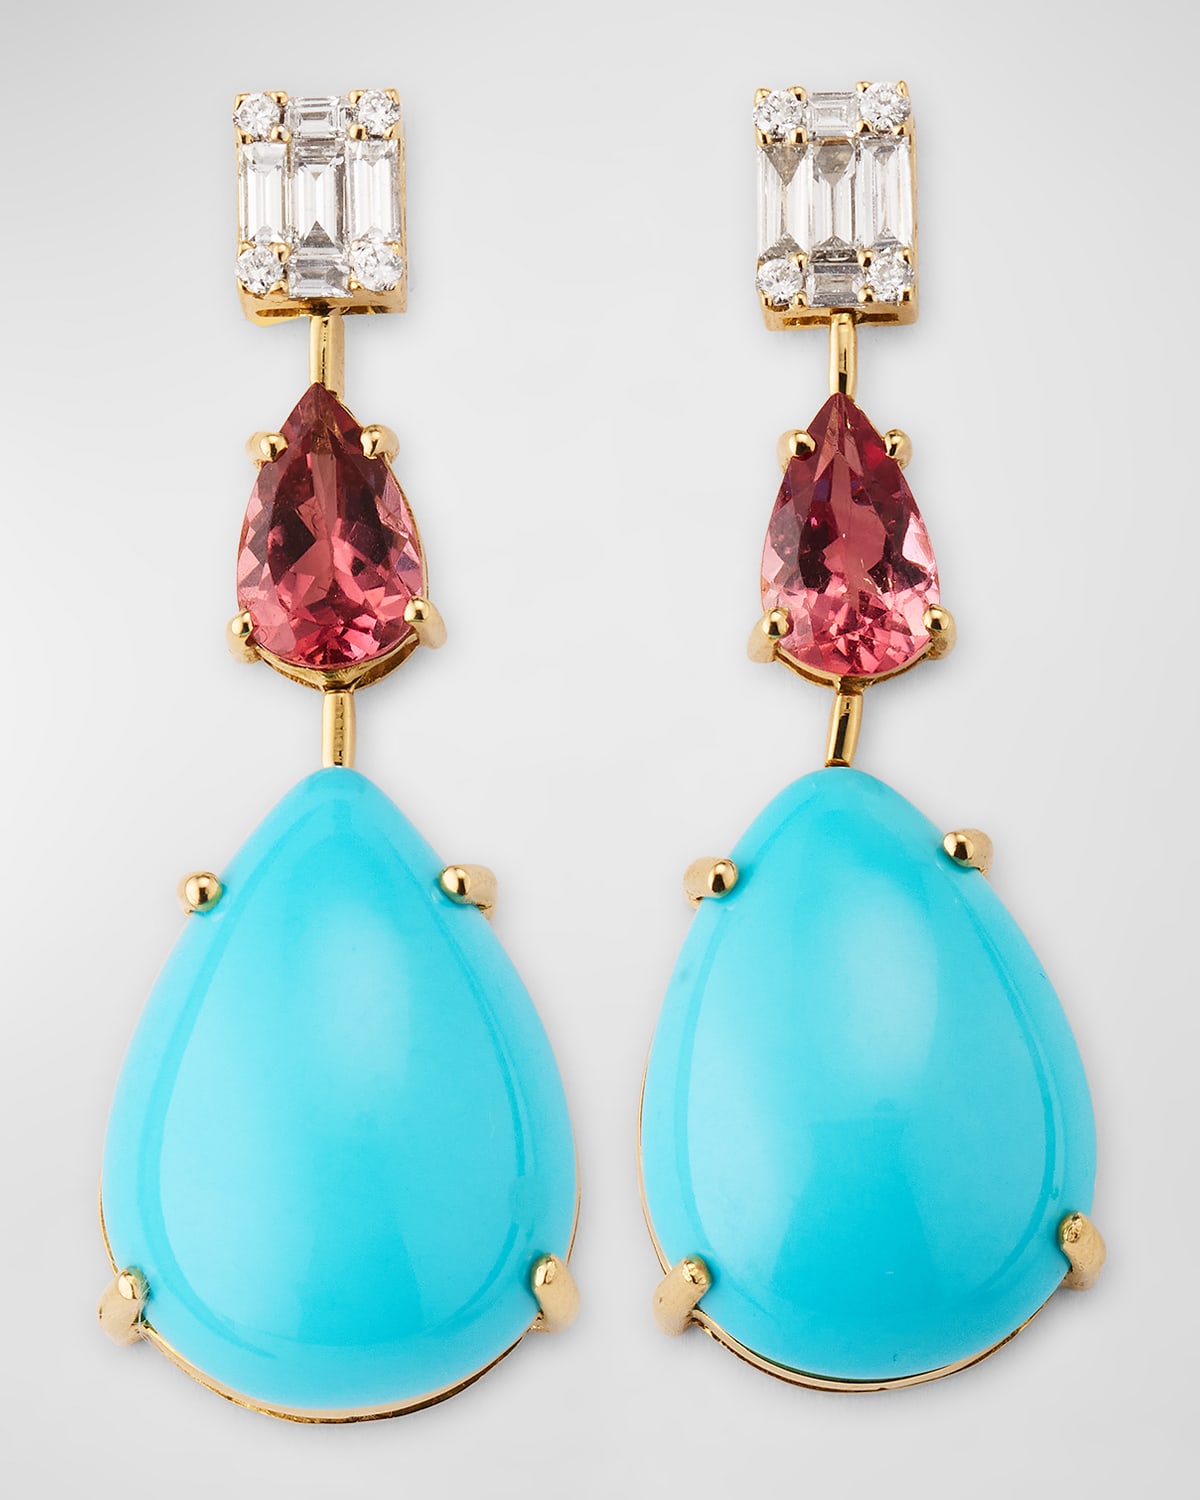 18K Yellow Gold Diamond, Pink Sapphire, and Turquoise Earrings